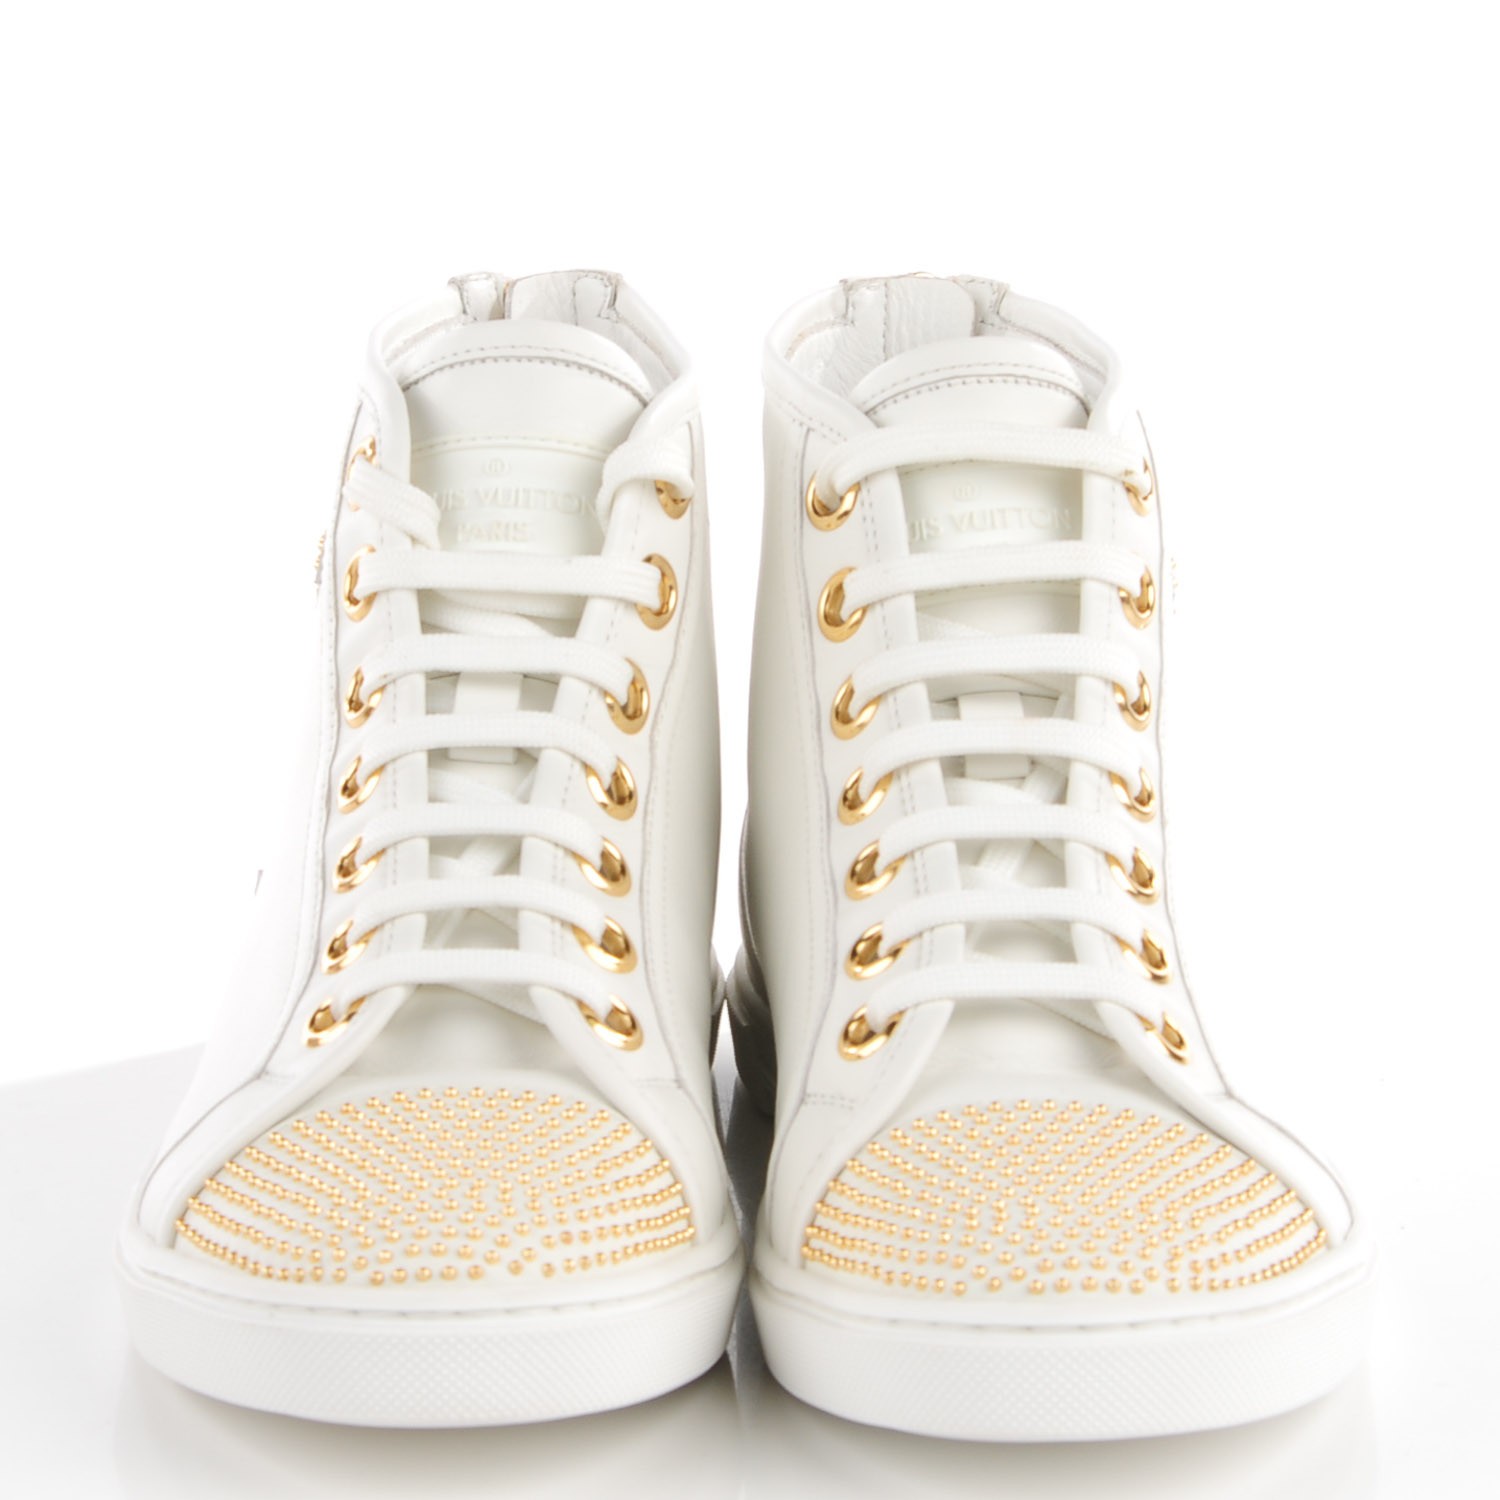 LOUIS VUITTON Leather Studded Punchy High Top Sneakers 36 White Gold 116107